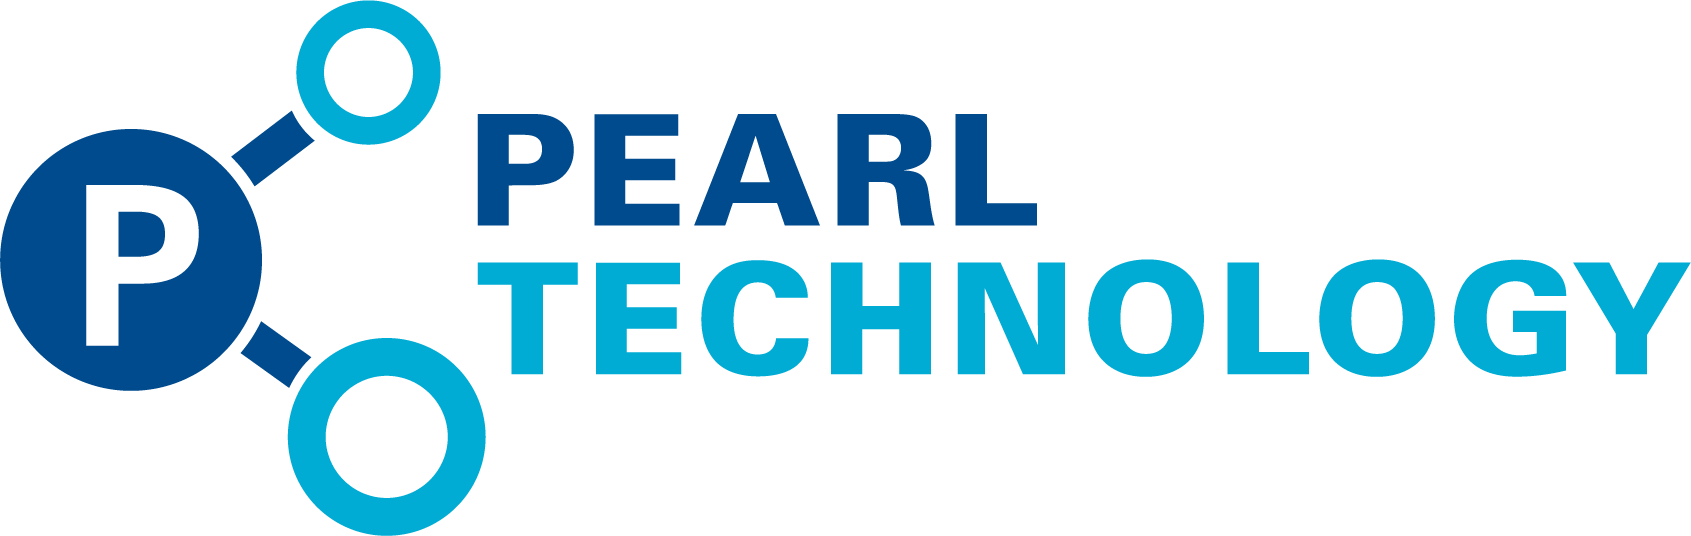 Pearl Technology Colored Logo